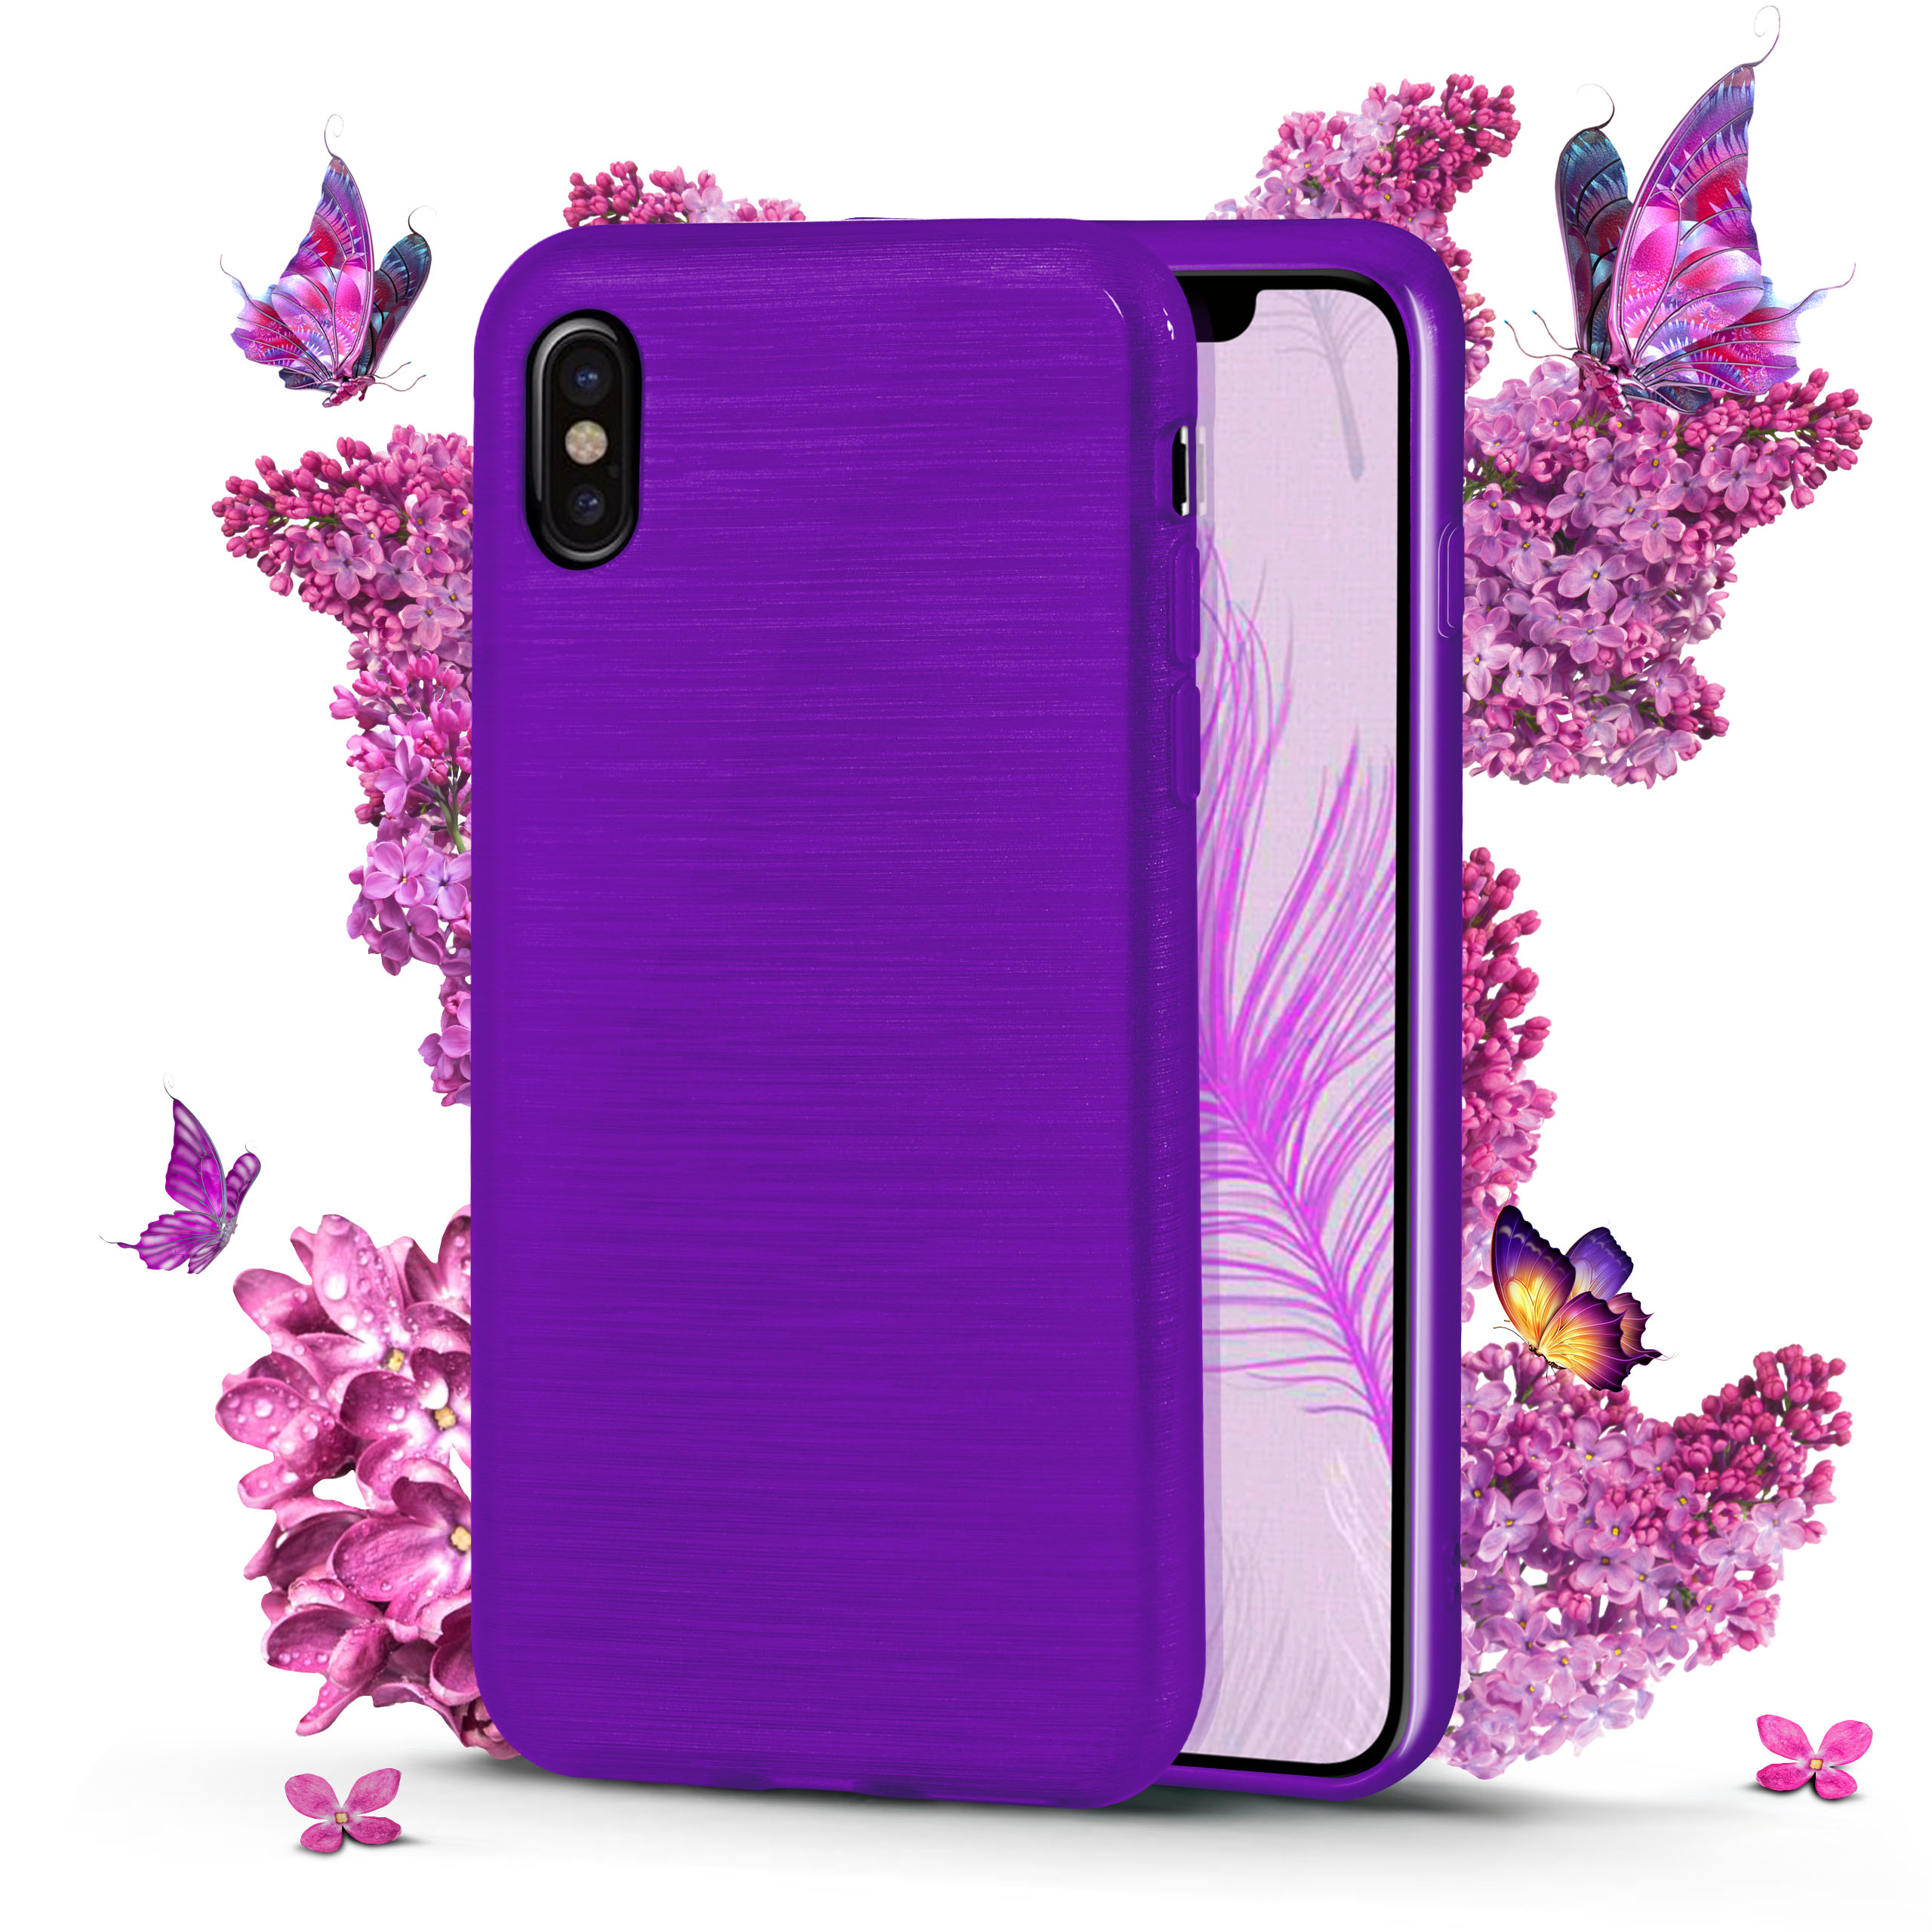 Brushed XS, Backcover, iPhone MOEX X Purpure-Purple Apple, / Case, iPhone